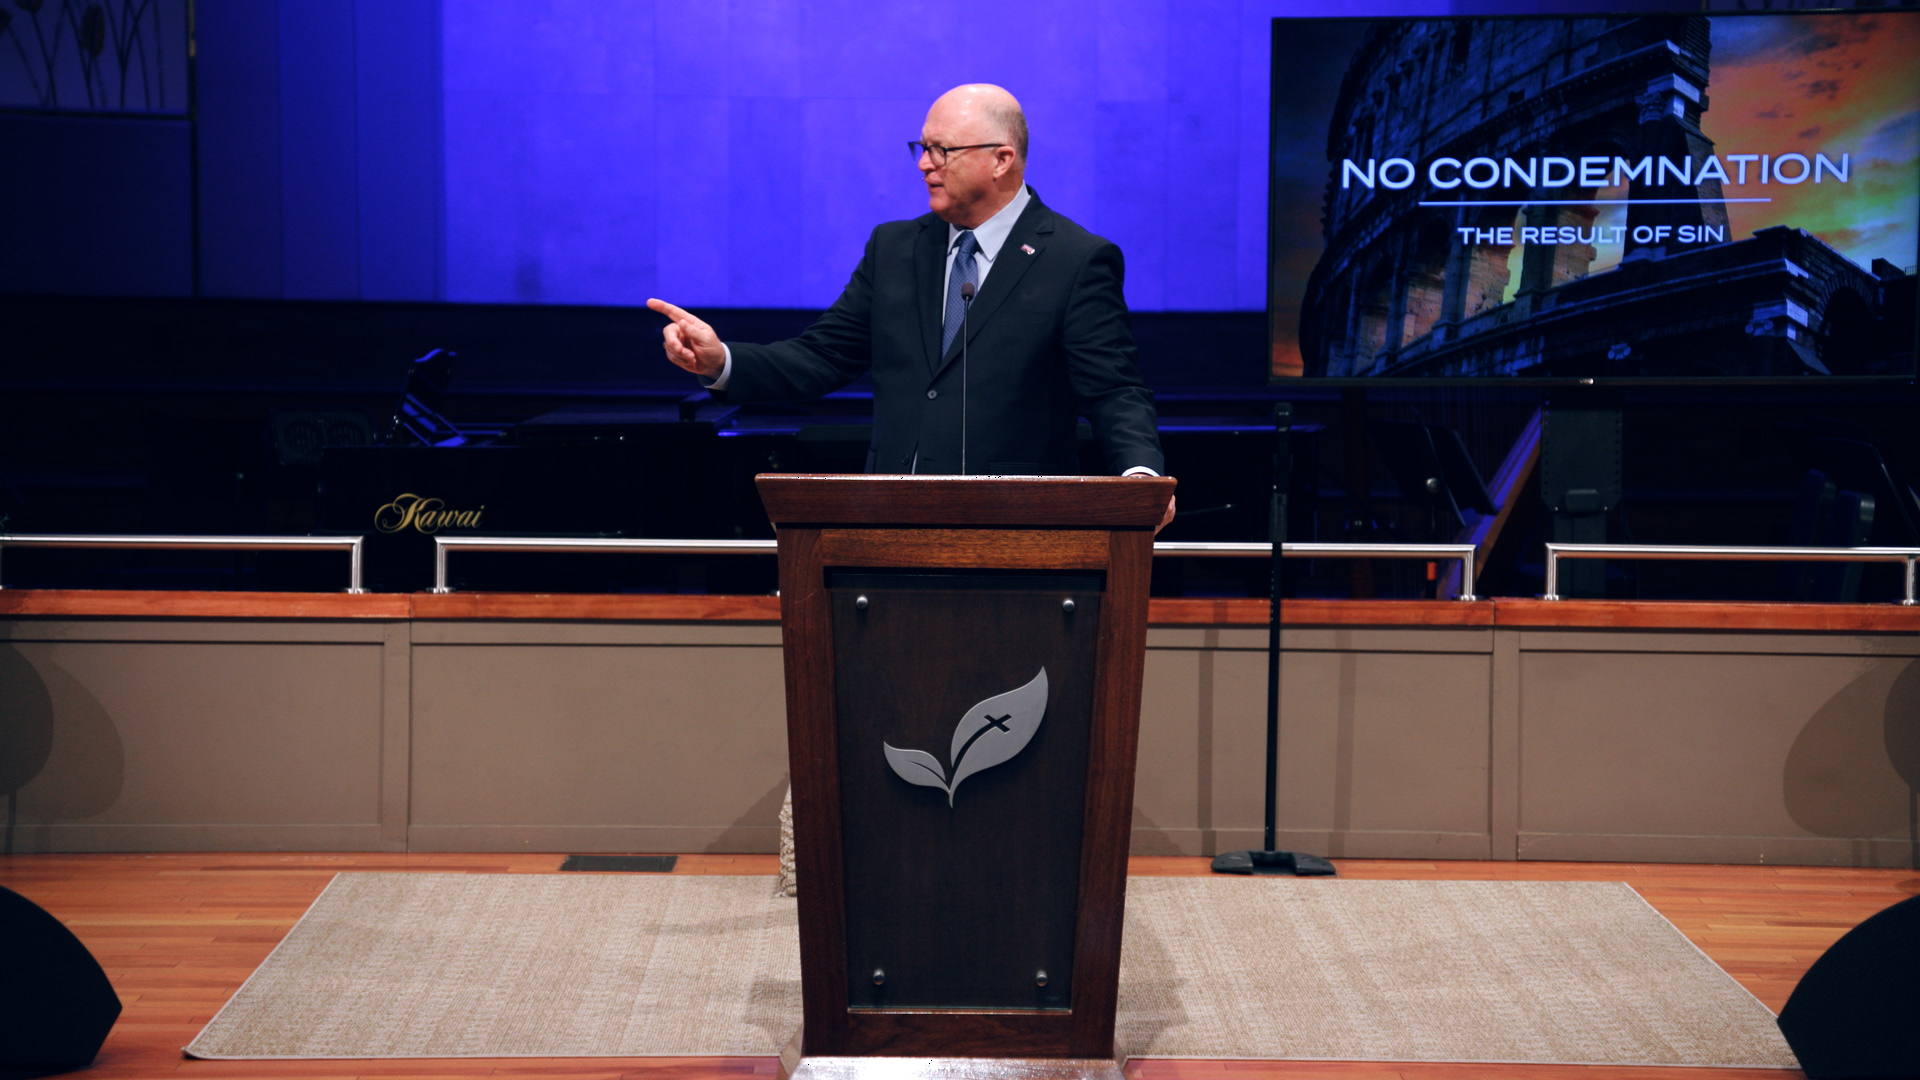 Pastor Paul Chappell: The Result of Sin